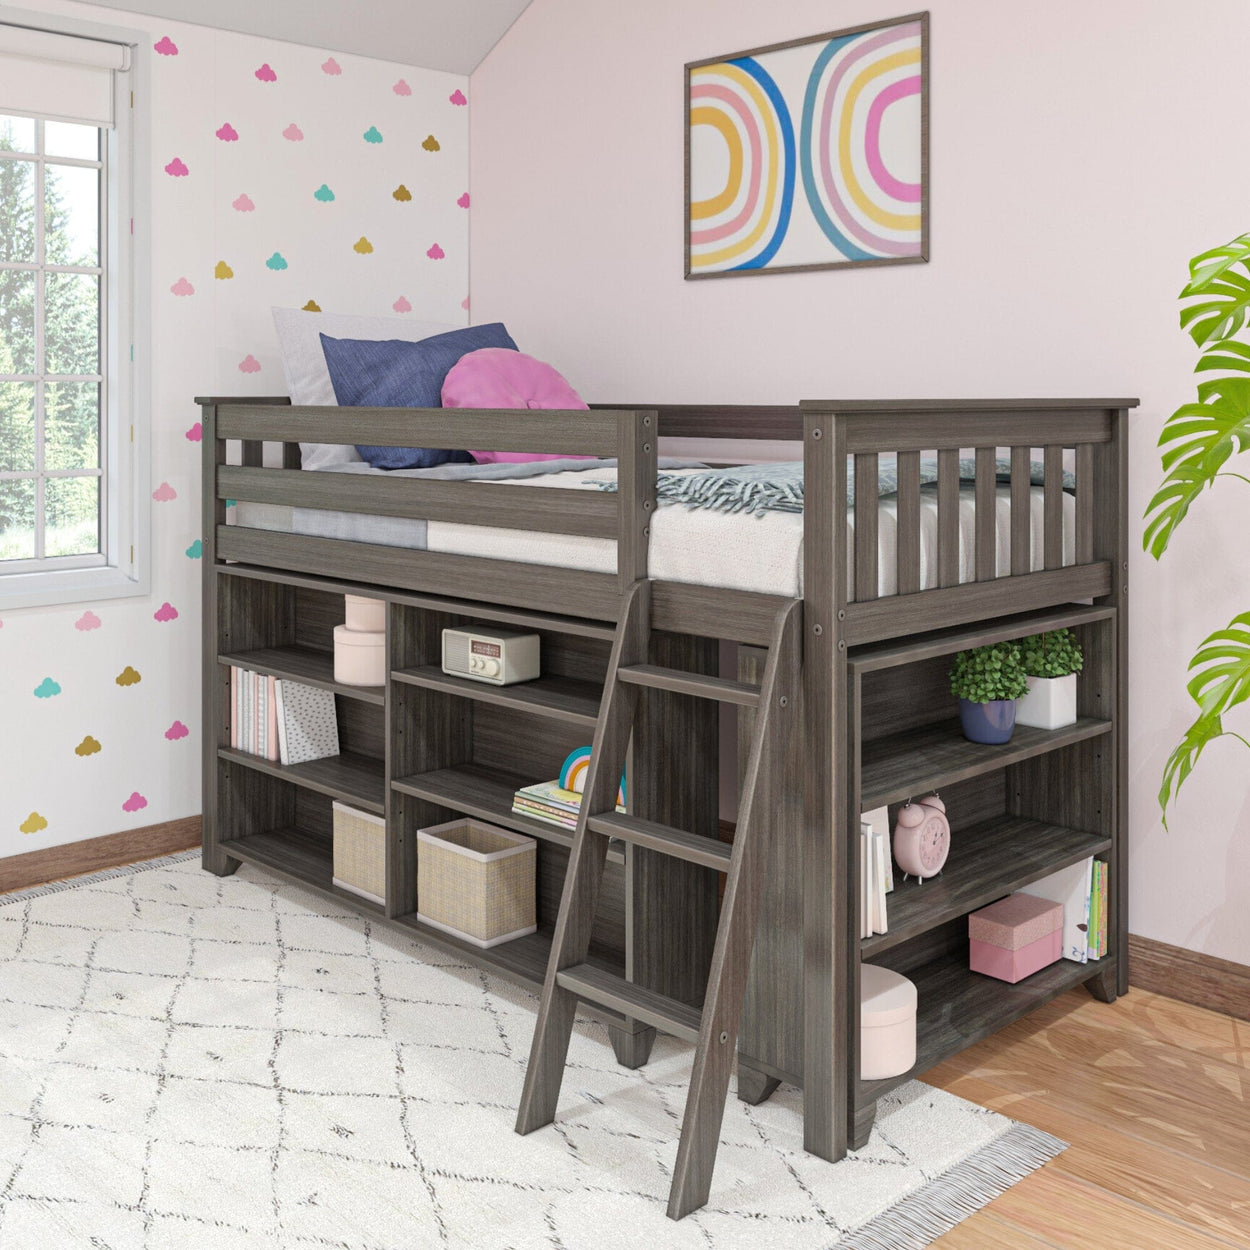 18-3B6B-151 : Loft Beds Twin-Size Low Loft with 3-Shelf Bookcase and 6-Shelf Bookcase, Clay